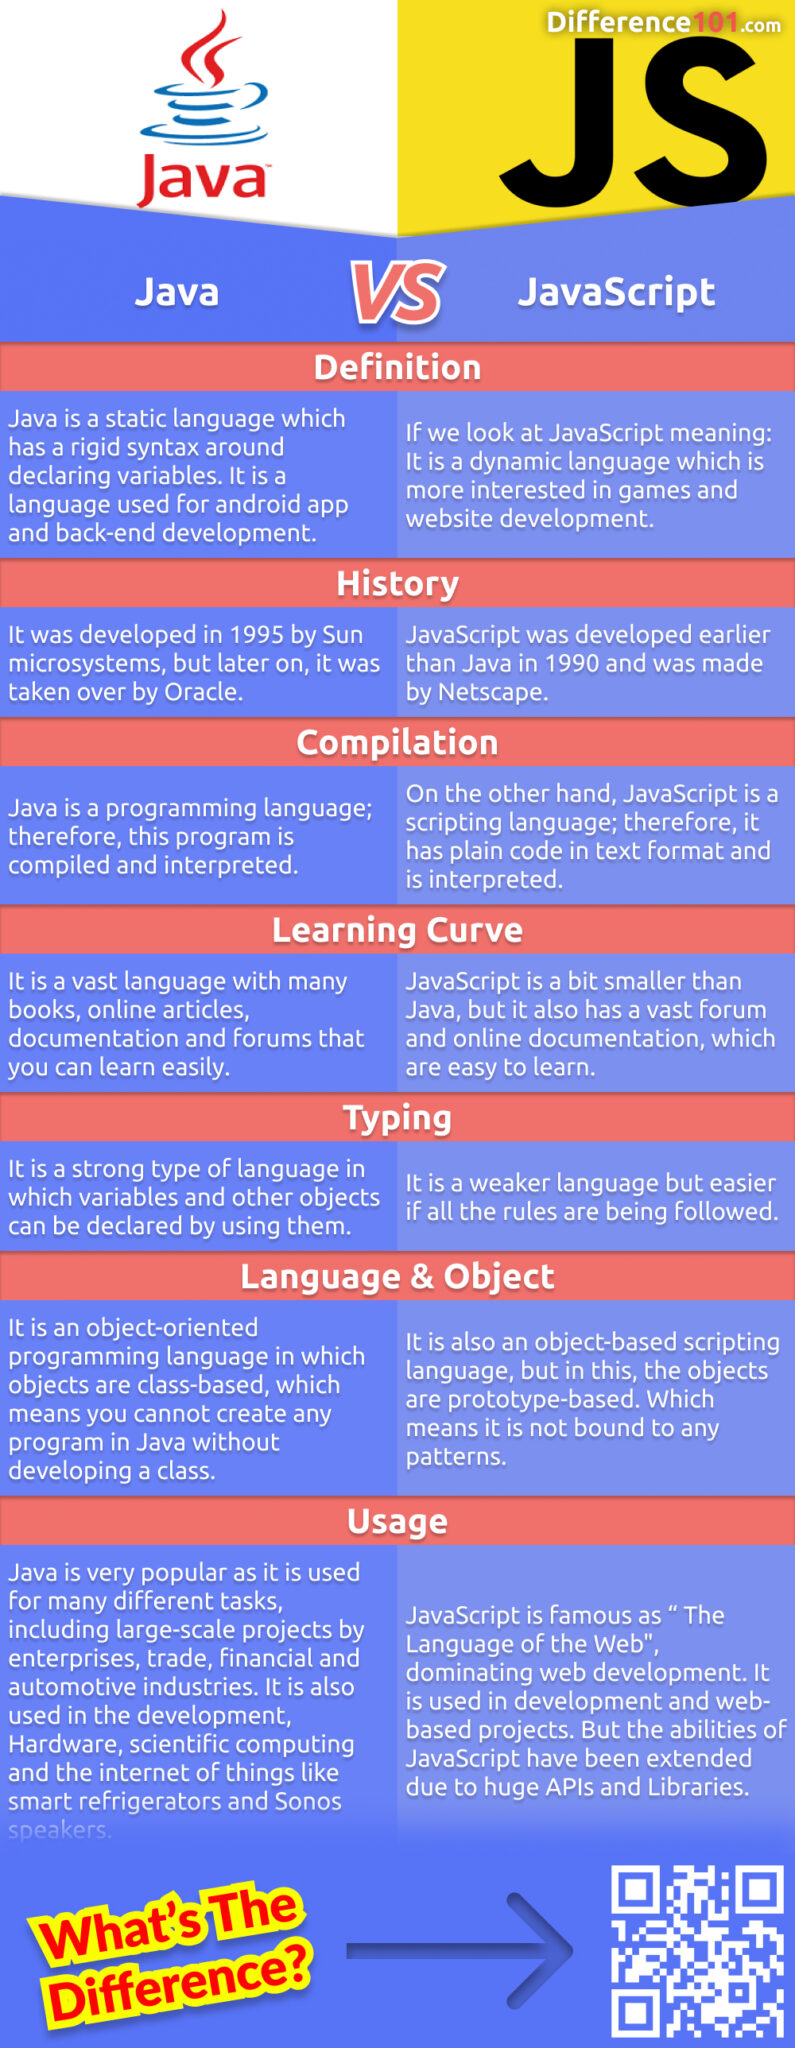 Java and JavaScript are two of the most popular programming languages. But what's the difference between them? We compare Java and JavaScrip and discuss the pros and cons of each.